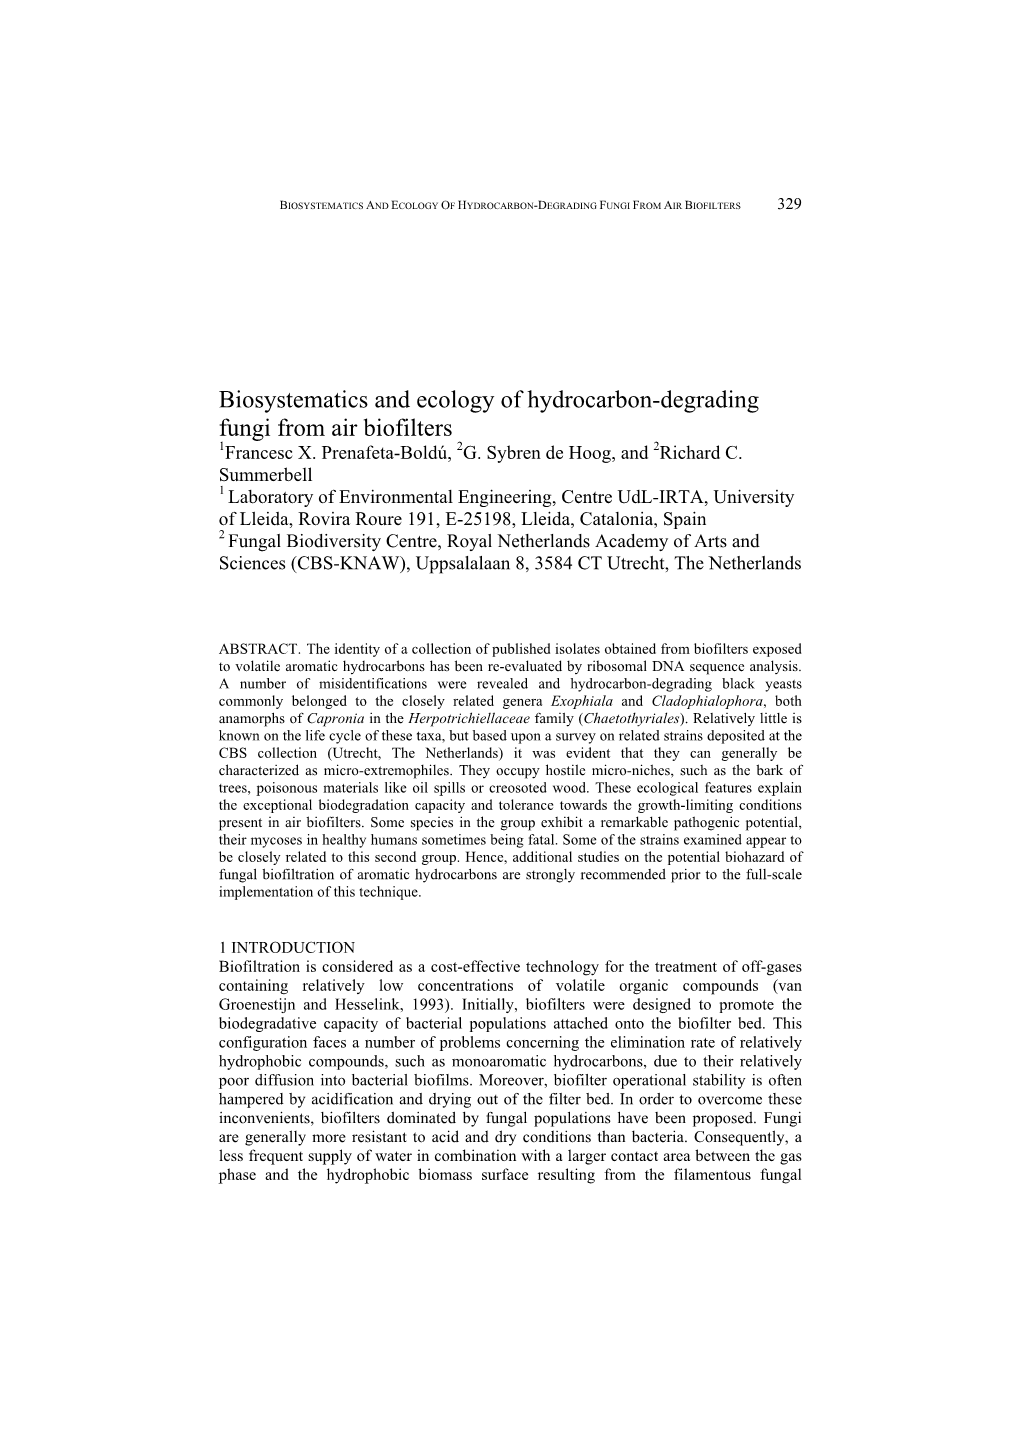 Biosystematics and Ecology of Hydrocarbon-Degrading Fungi from Air Biofilters 329